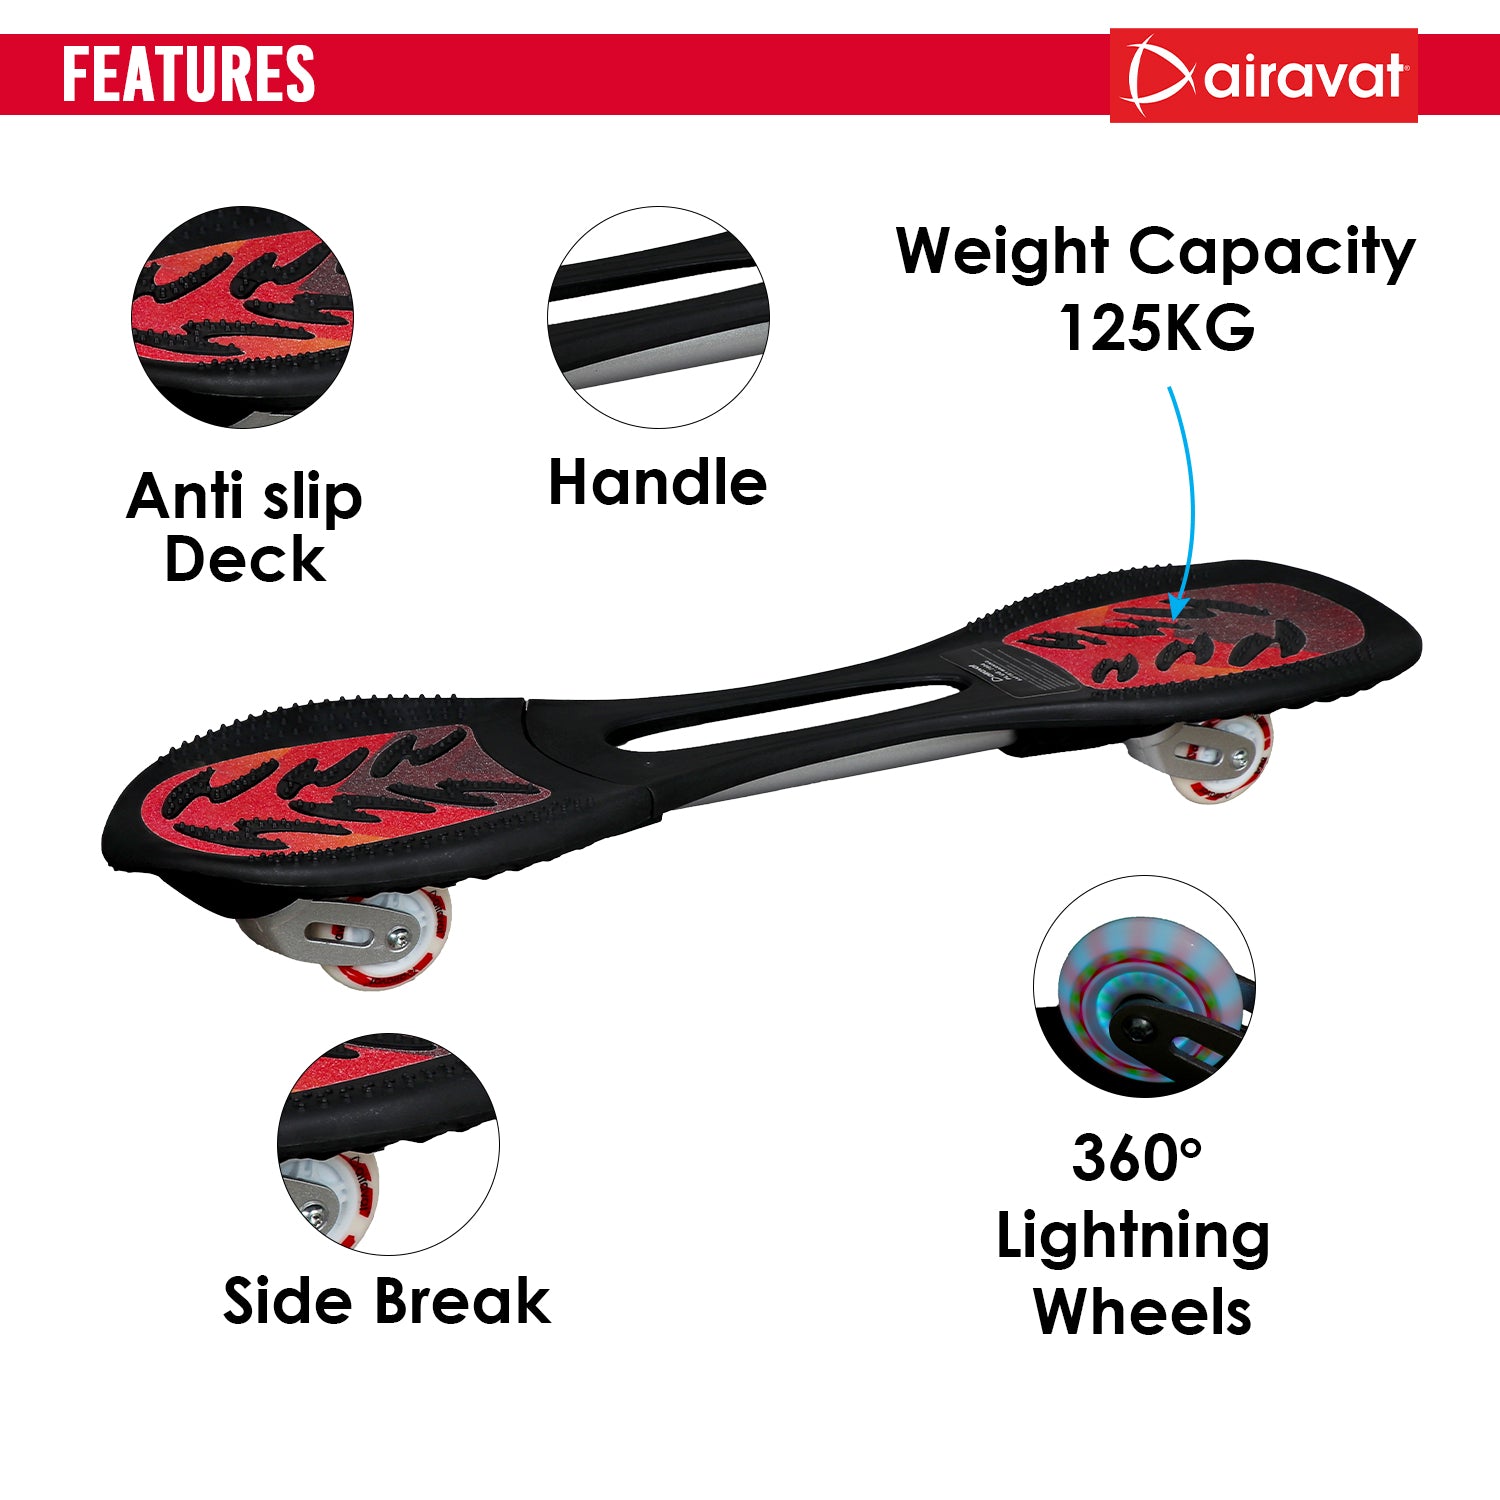 waveboard features red